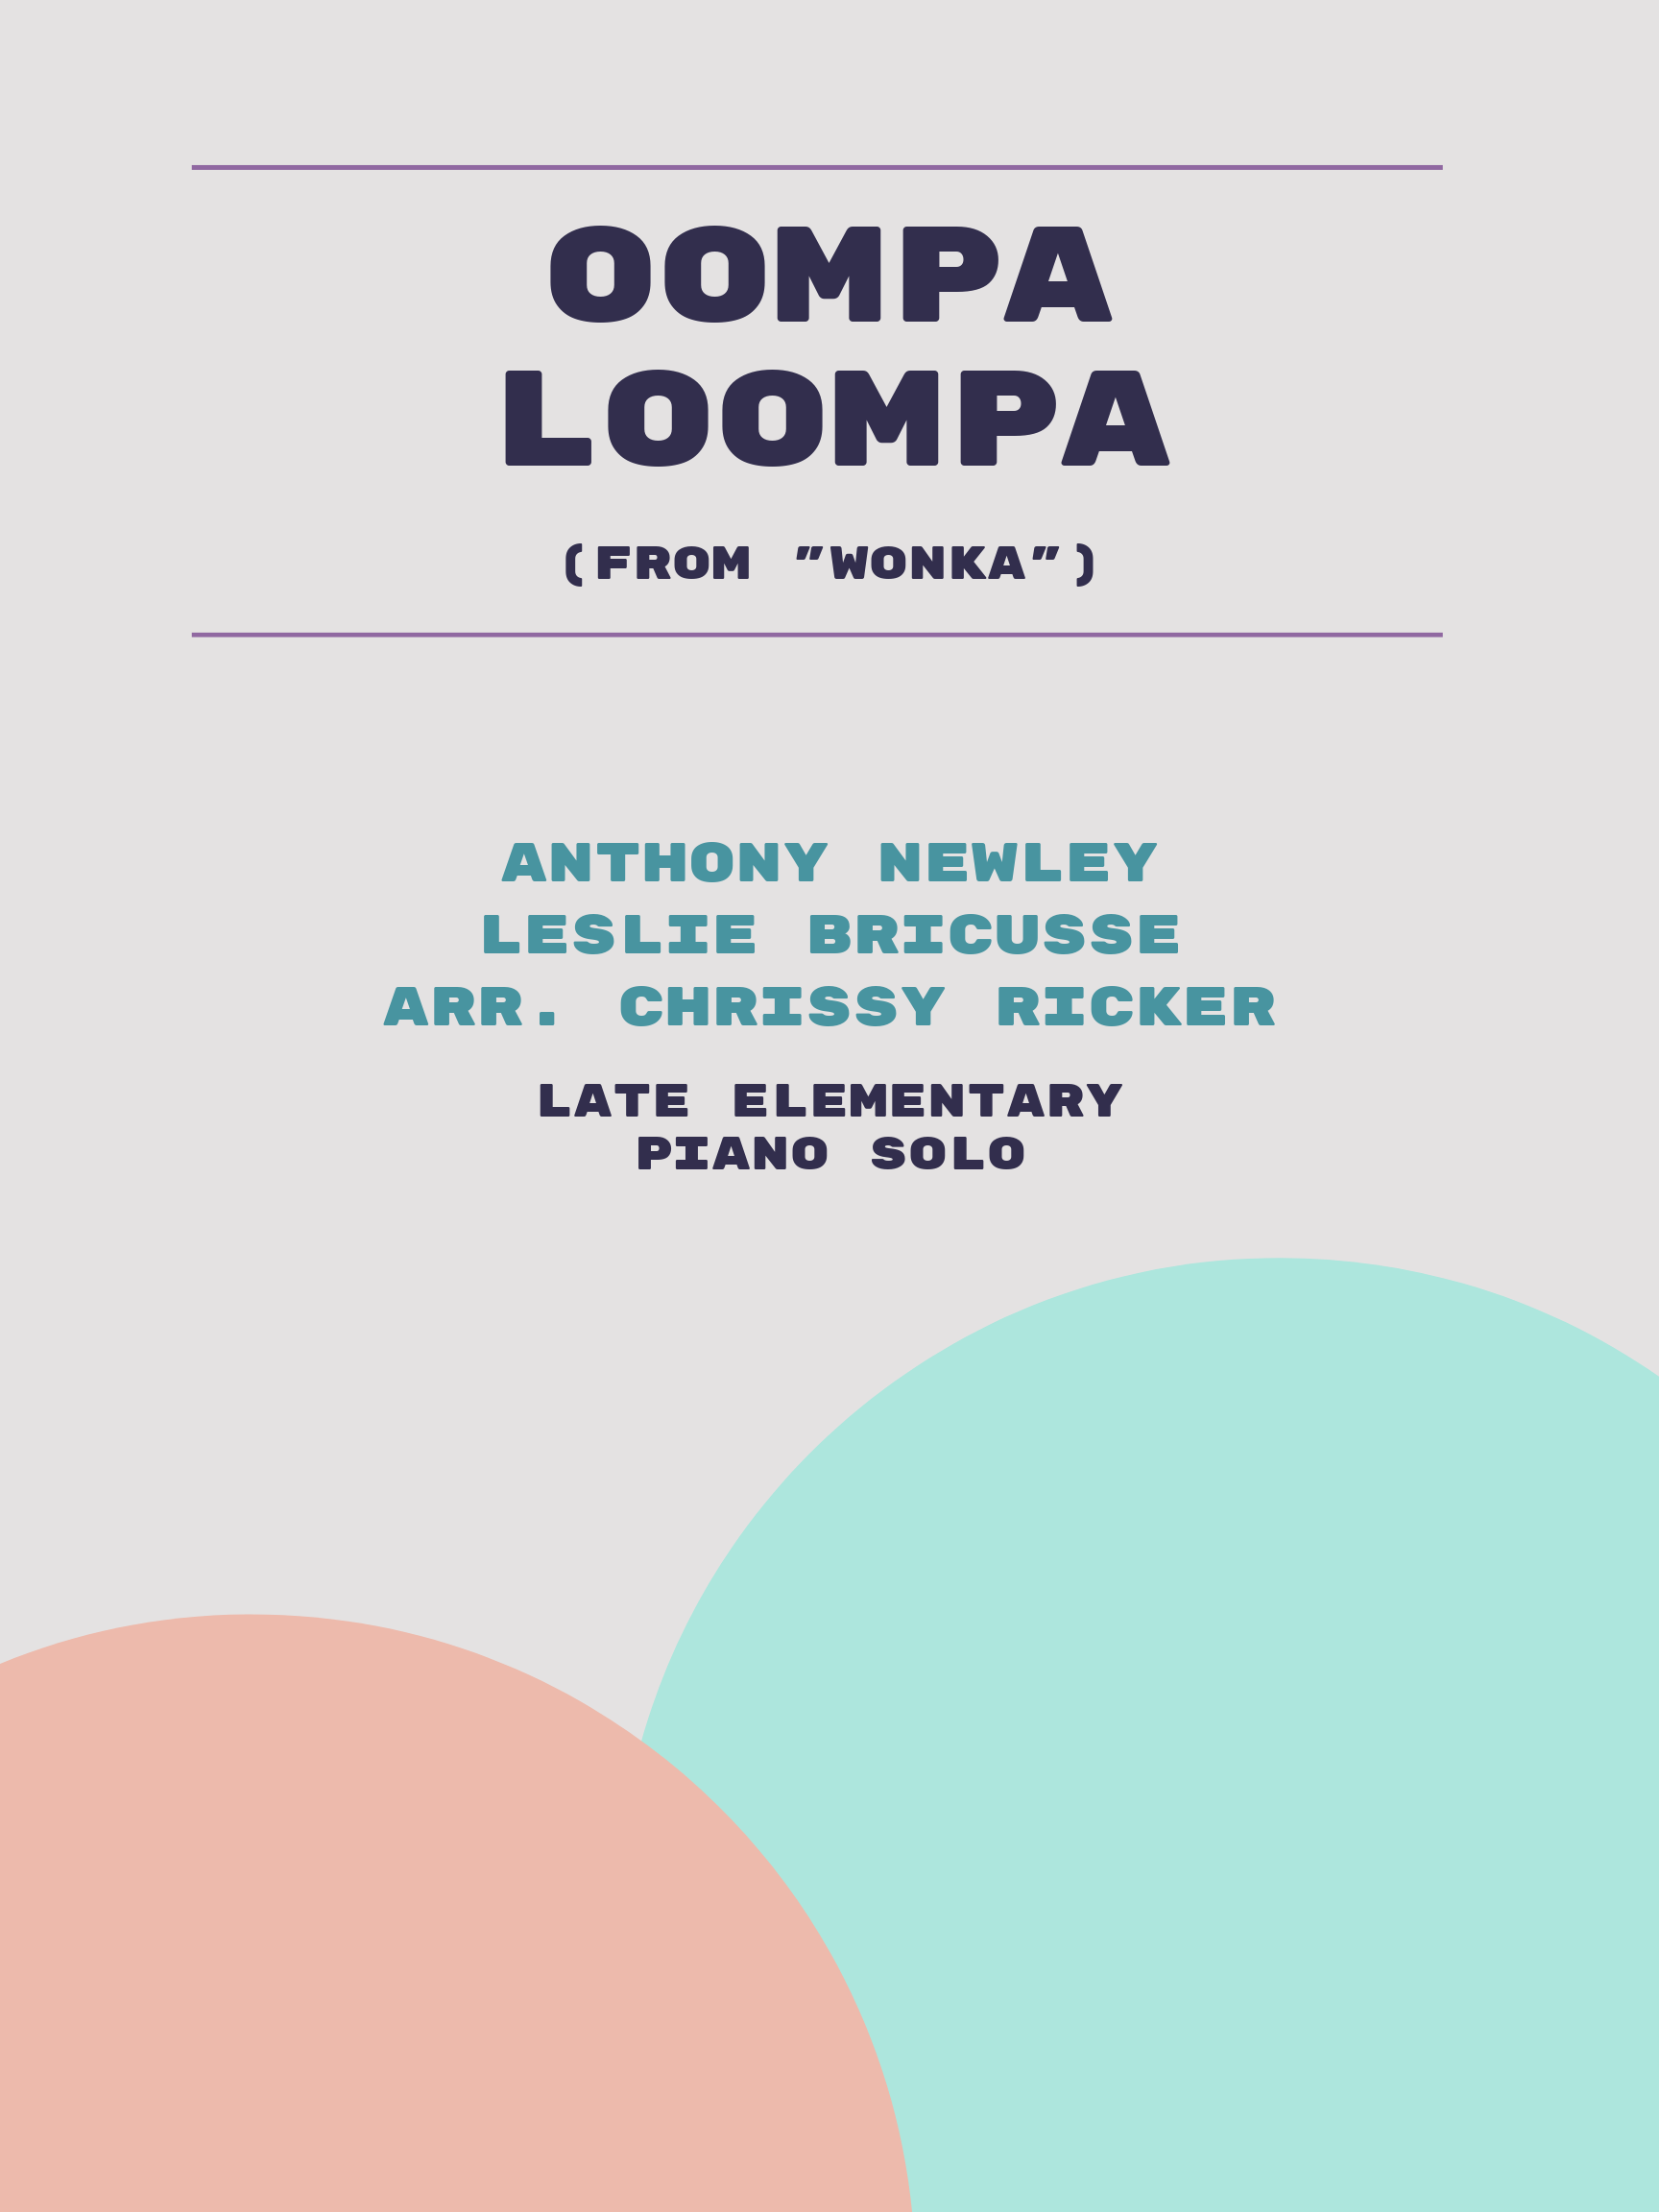 Oompa Loompa by Anthony Newley, Leslie Bricusse